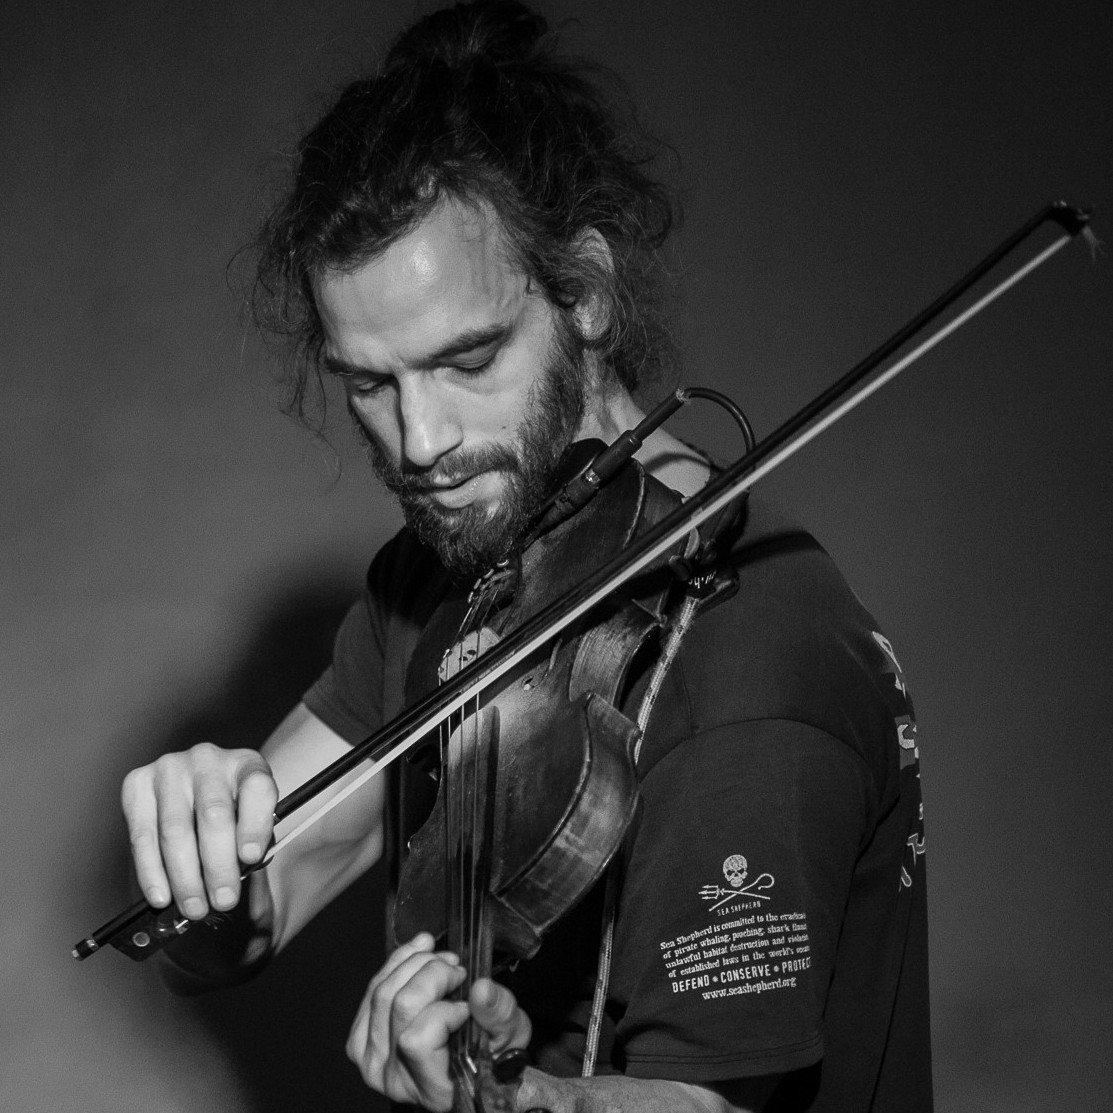 Ben Mo, Fiddle Player with The Freedom Fields Ceilidh Band